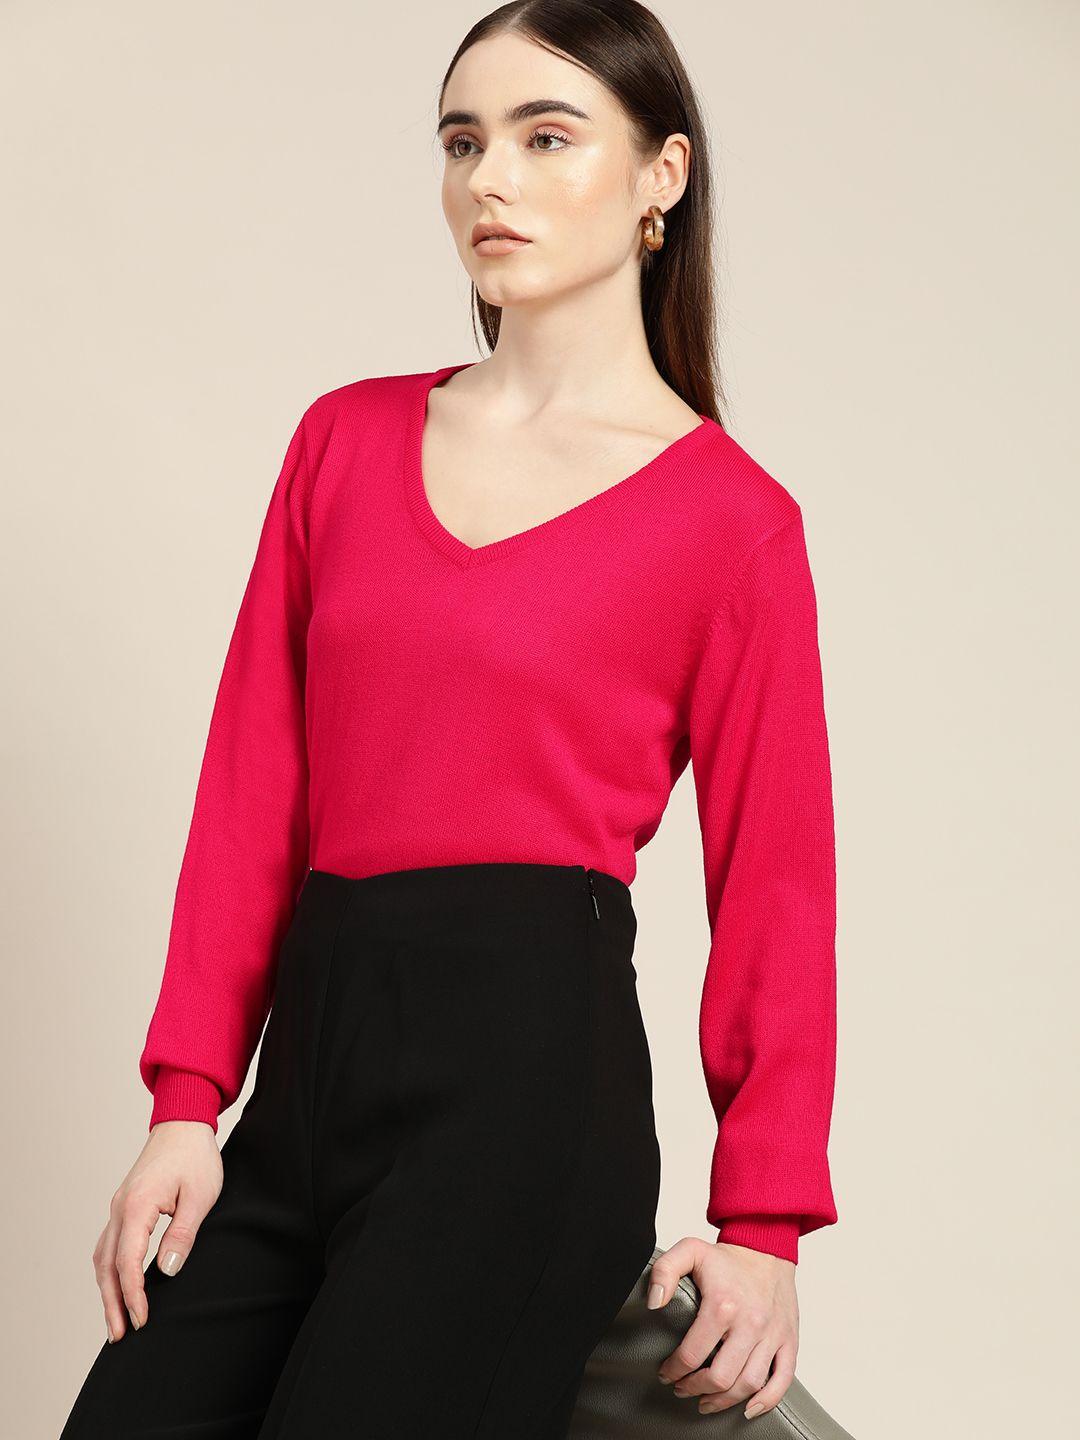 her-by-invictus-women-magenta-solid-acrylic-v-neck-pullover